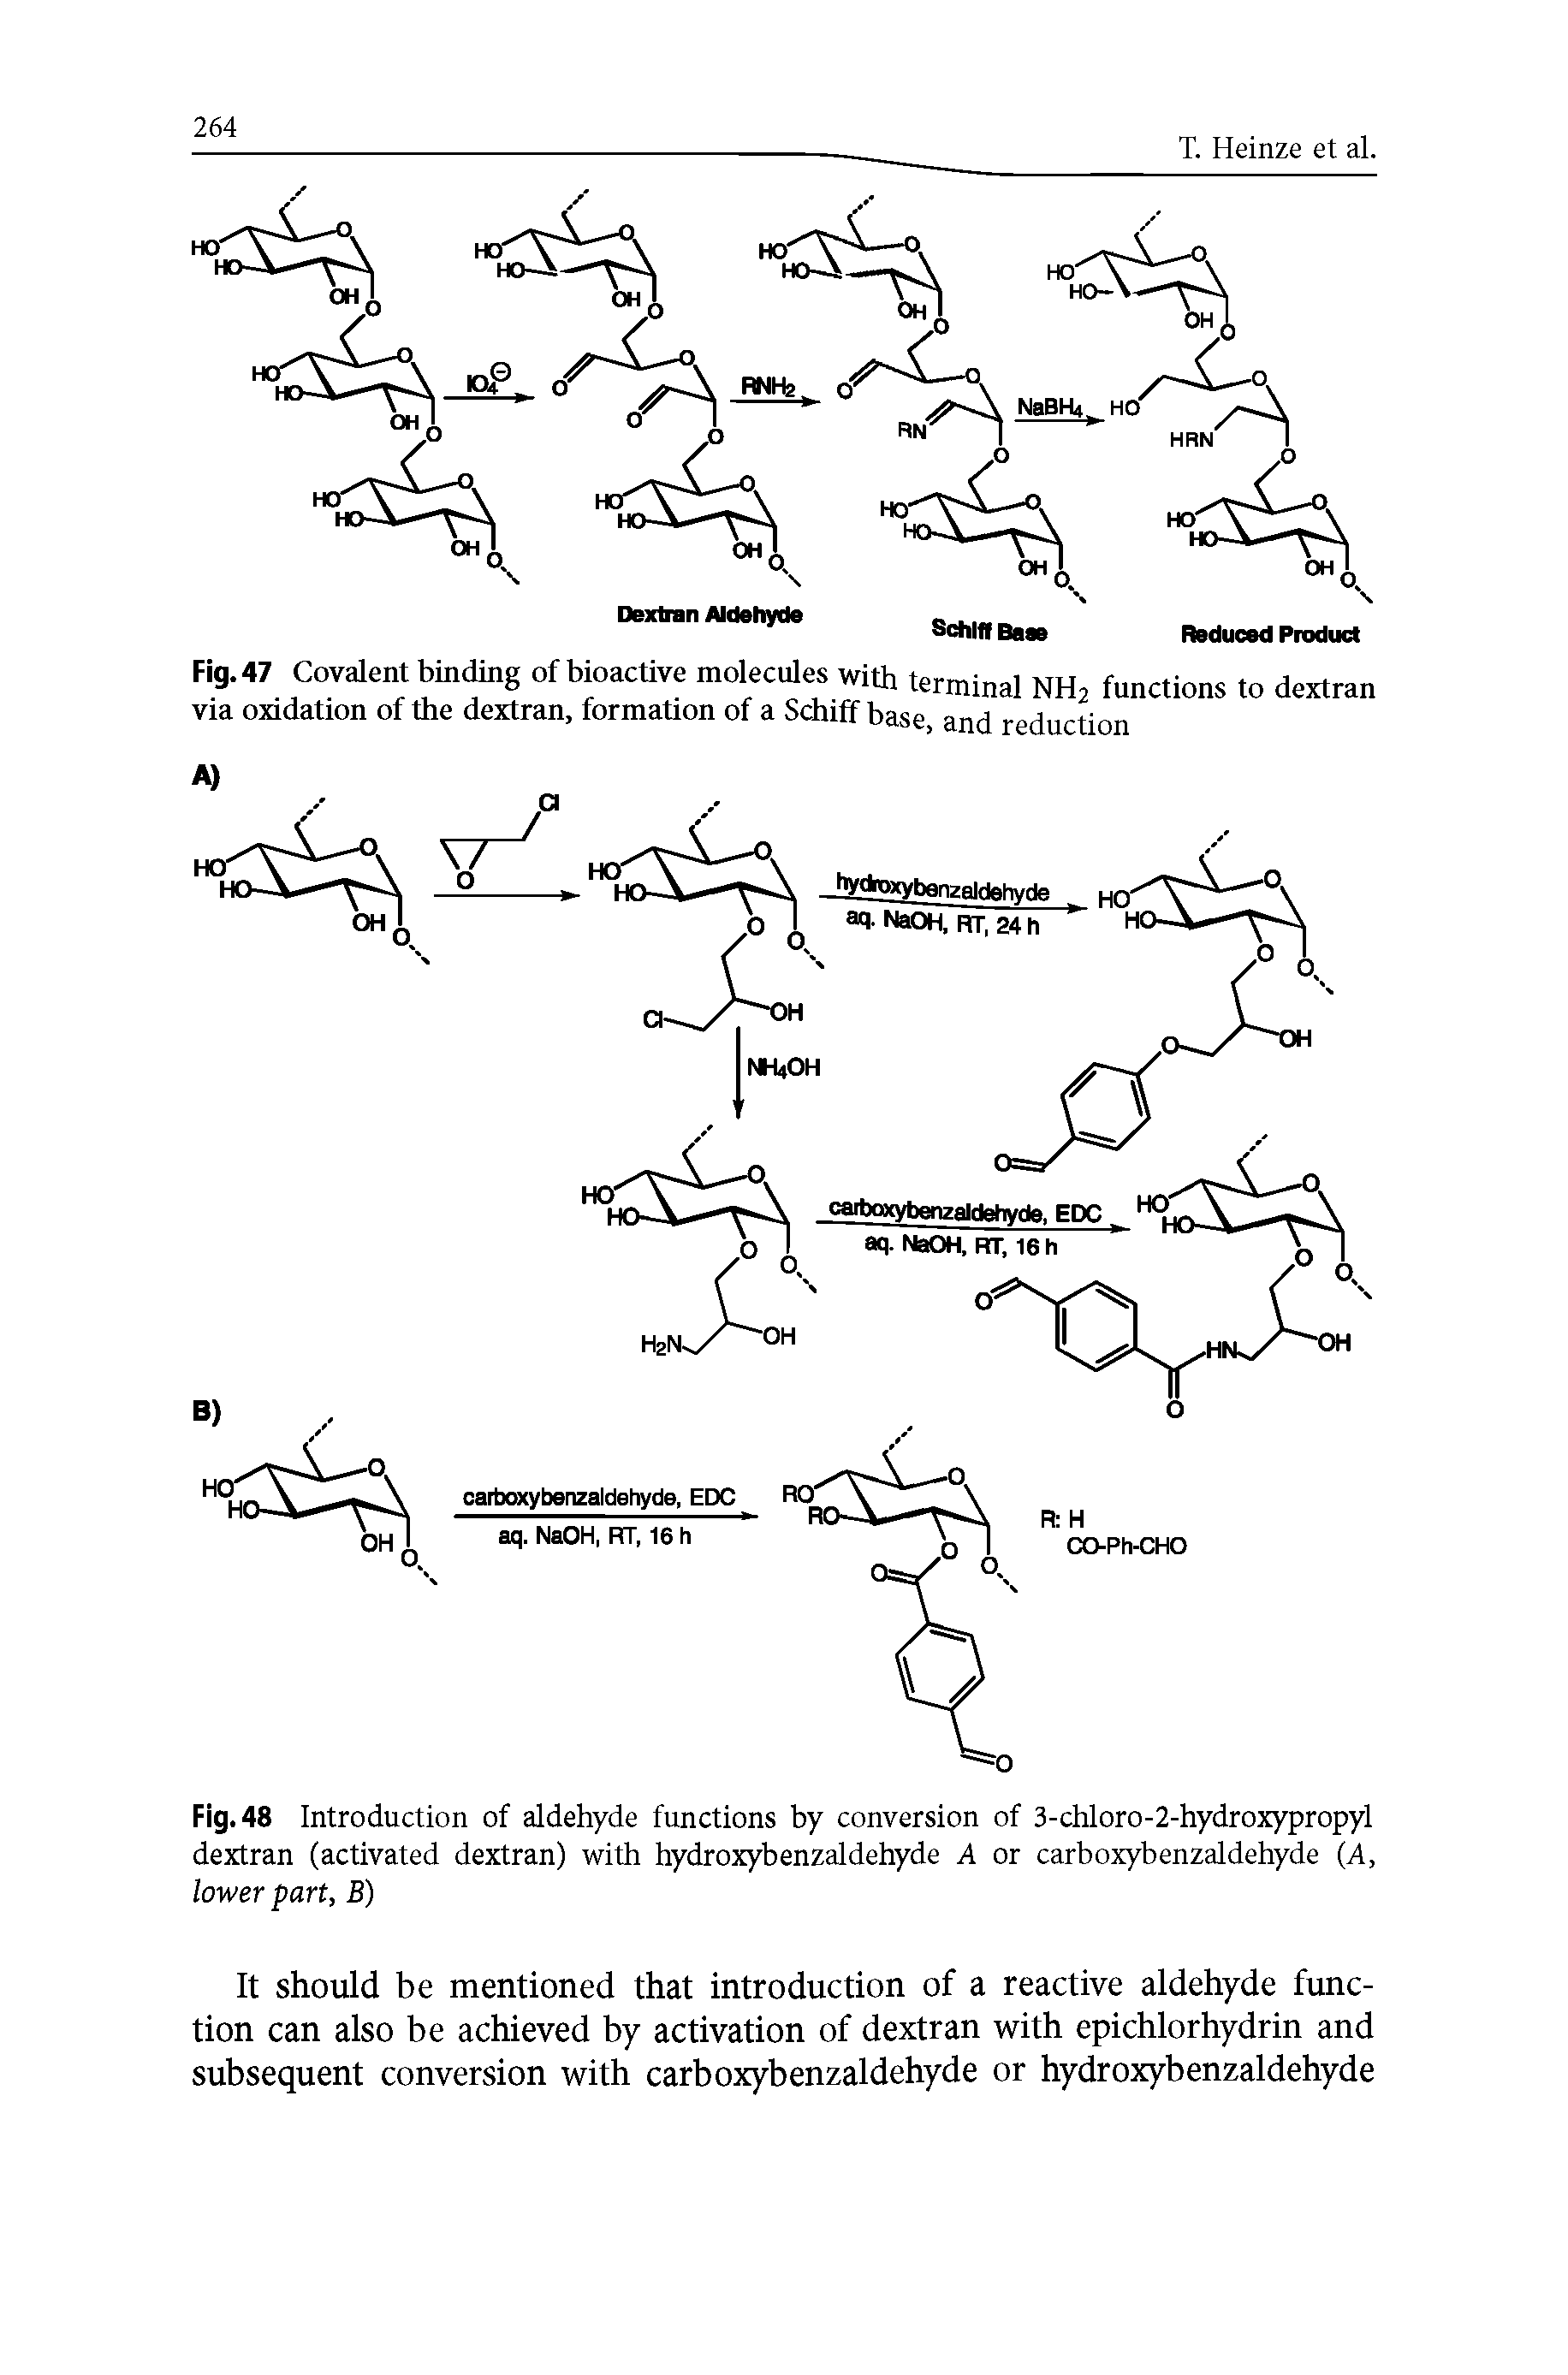 Fig. 48 Introduction of aldehyde functions by conversion of 3-chloro-2-hydroxypropyl dextran (activated dextran) with hydroxybenzaldehyde A or carboxybenzaldehyde (A, lower part, B)...